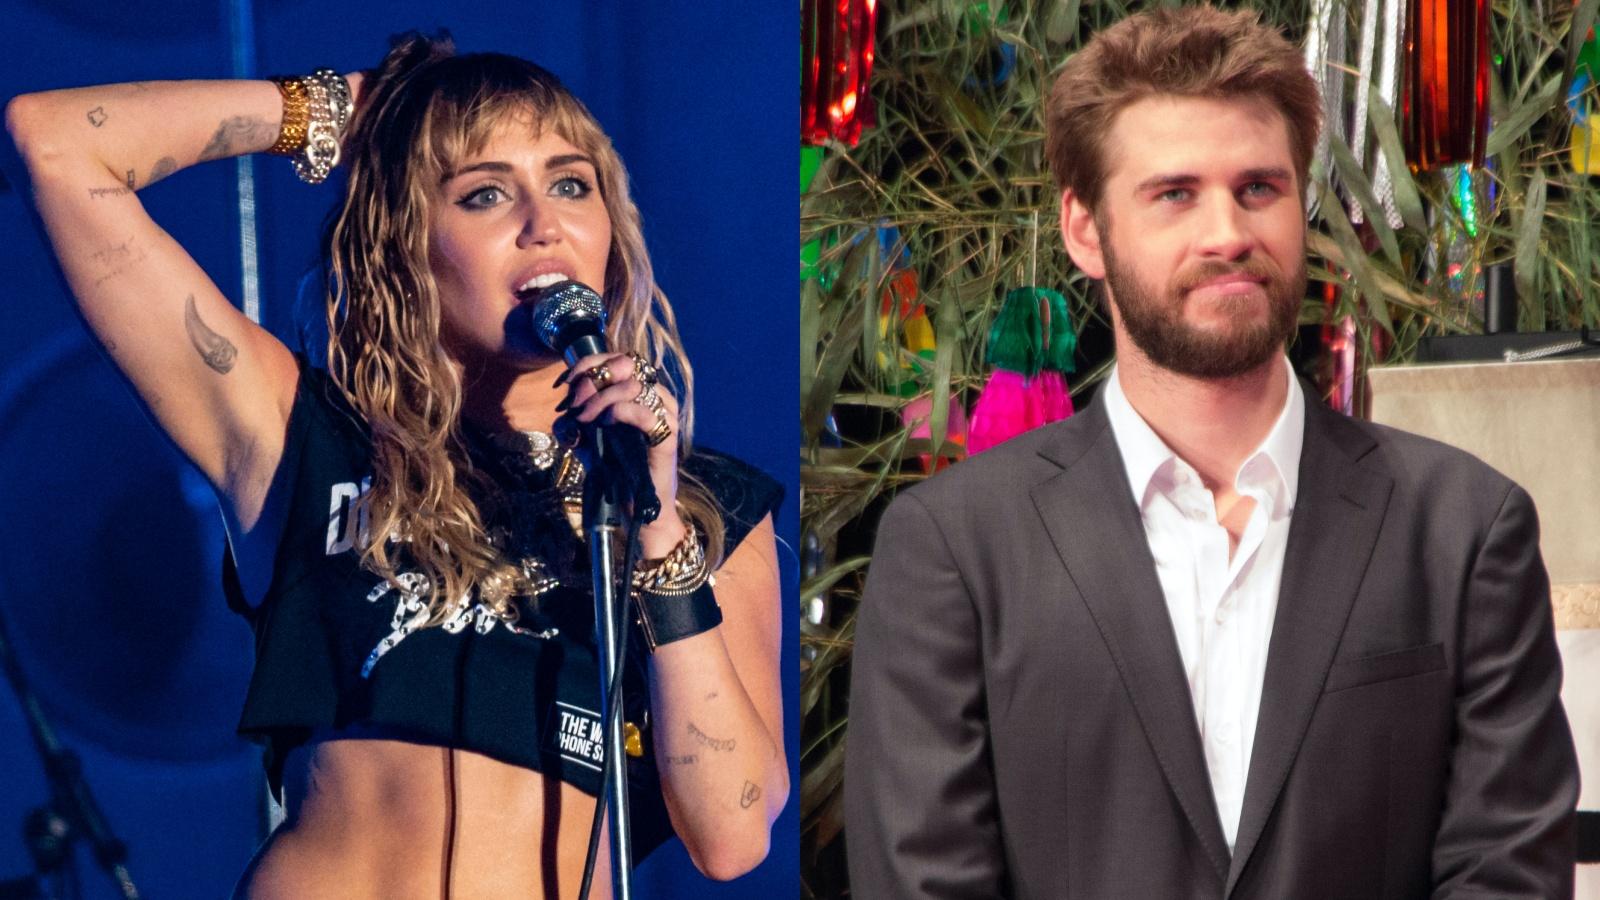 Miley Cyrus and Liam Hemsworth in a side-by-side photo